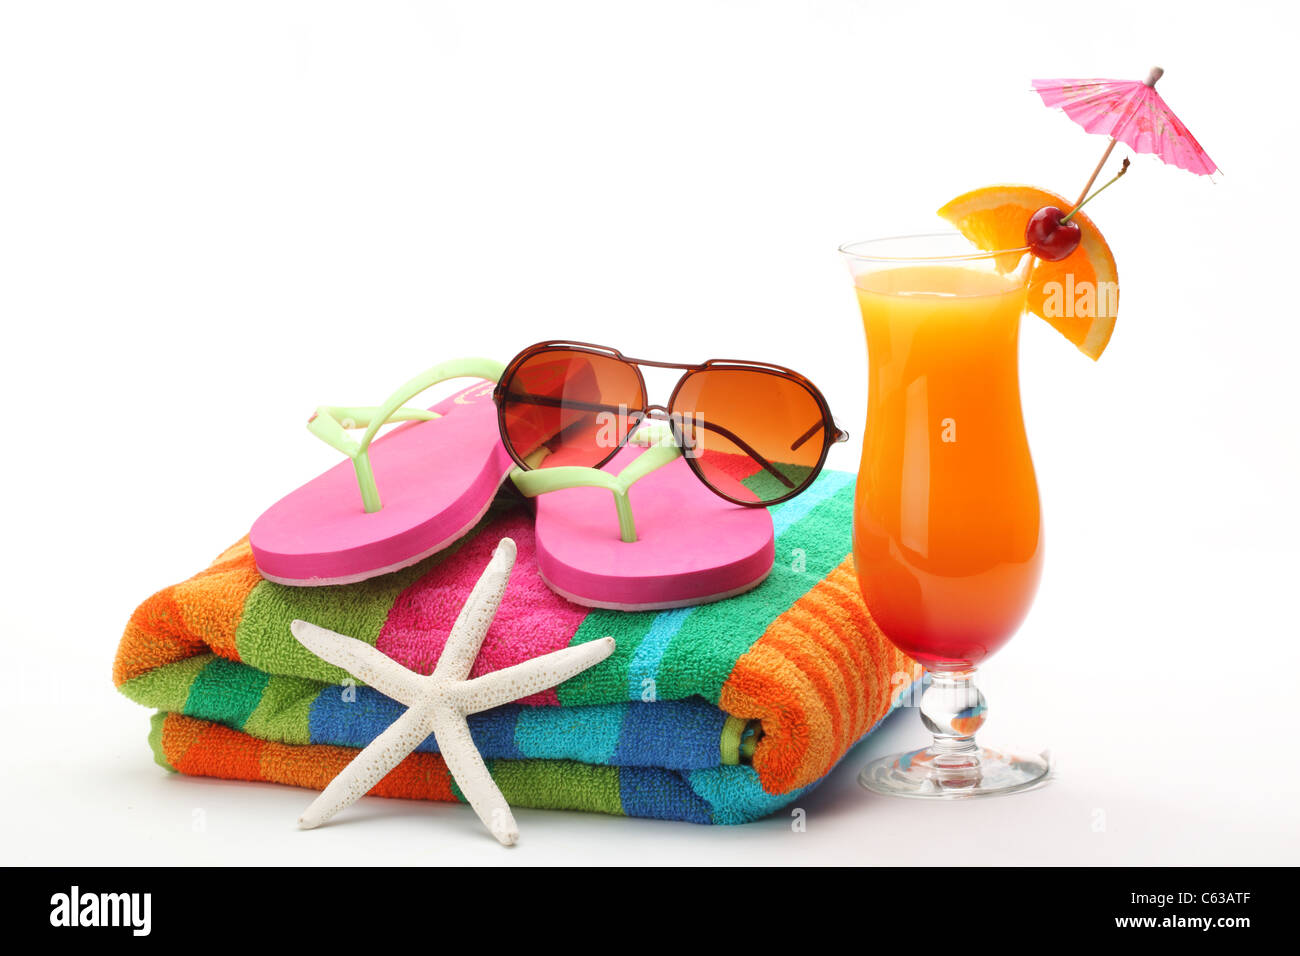 Beach accessories with swimming suit and tequila sunrise cocktail on white background. Stock Photo